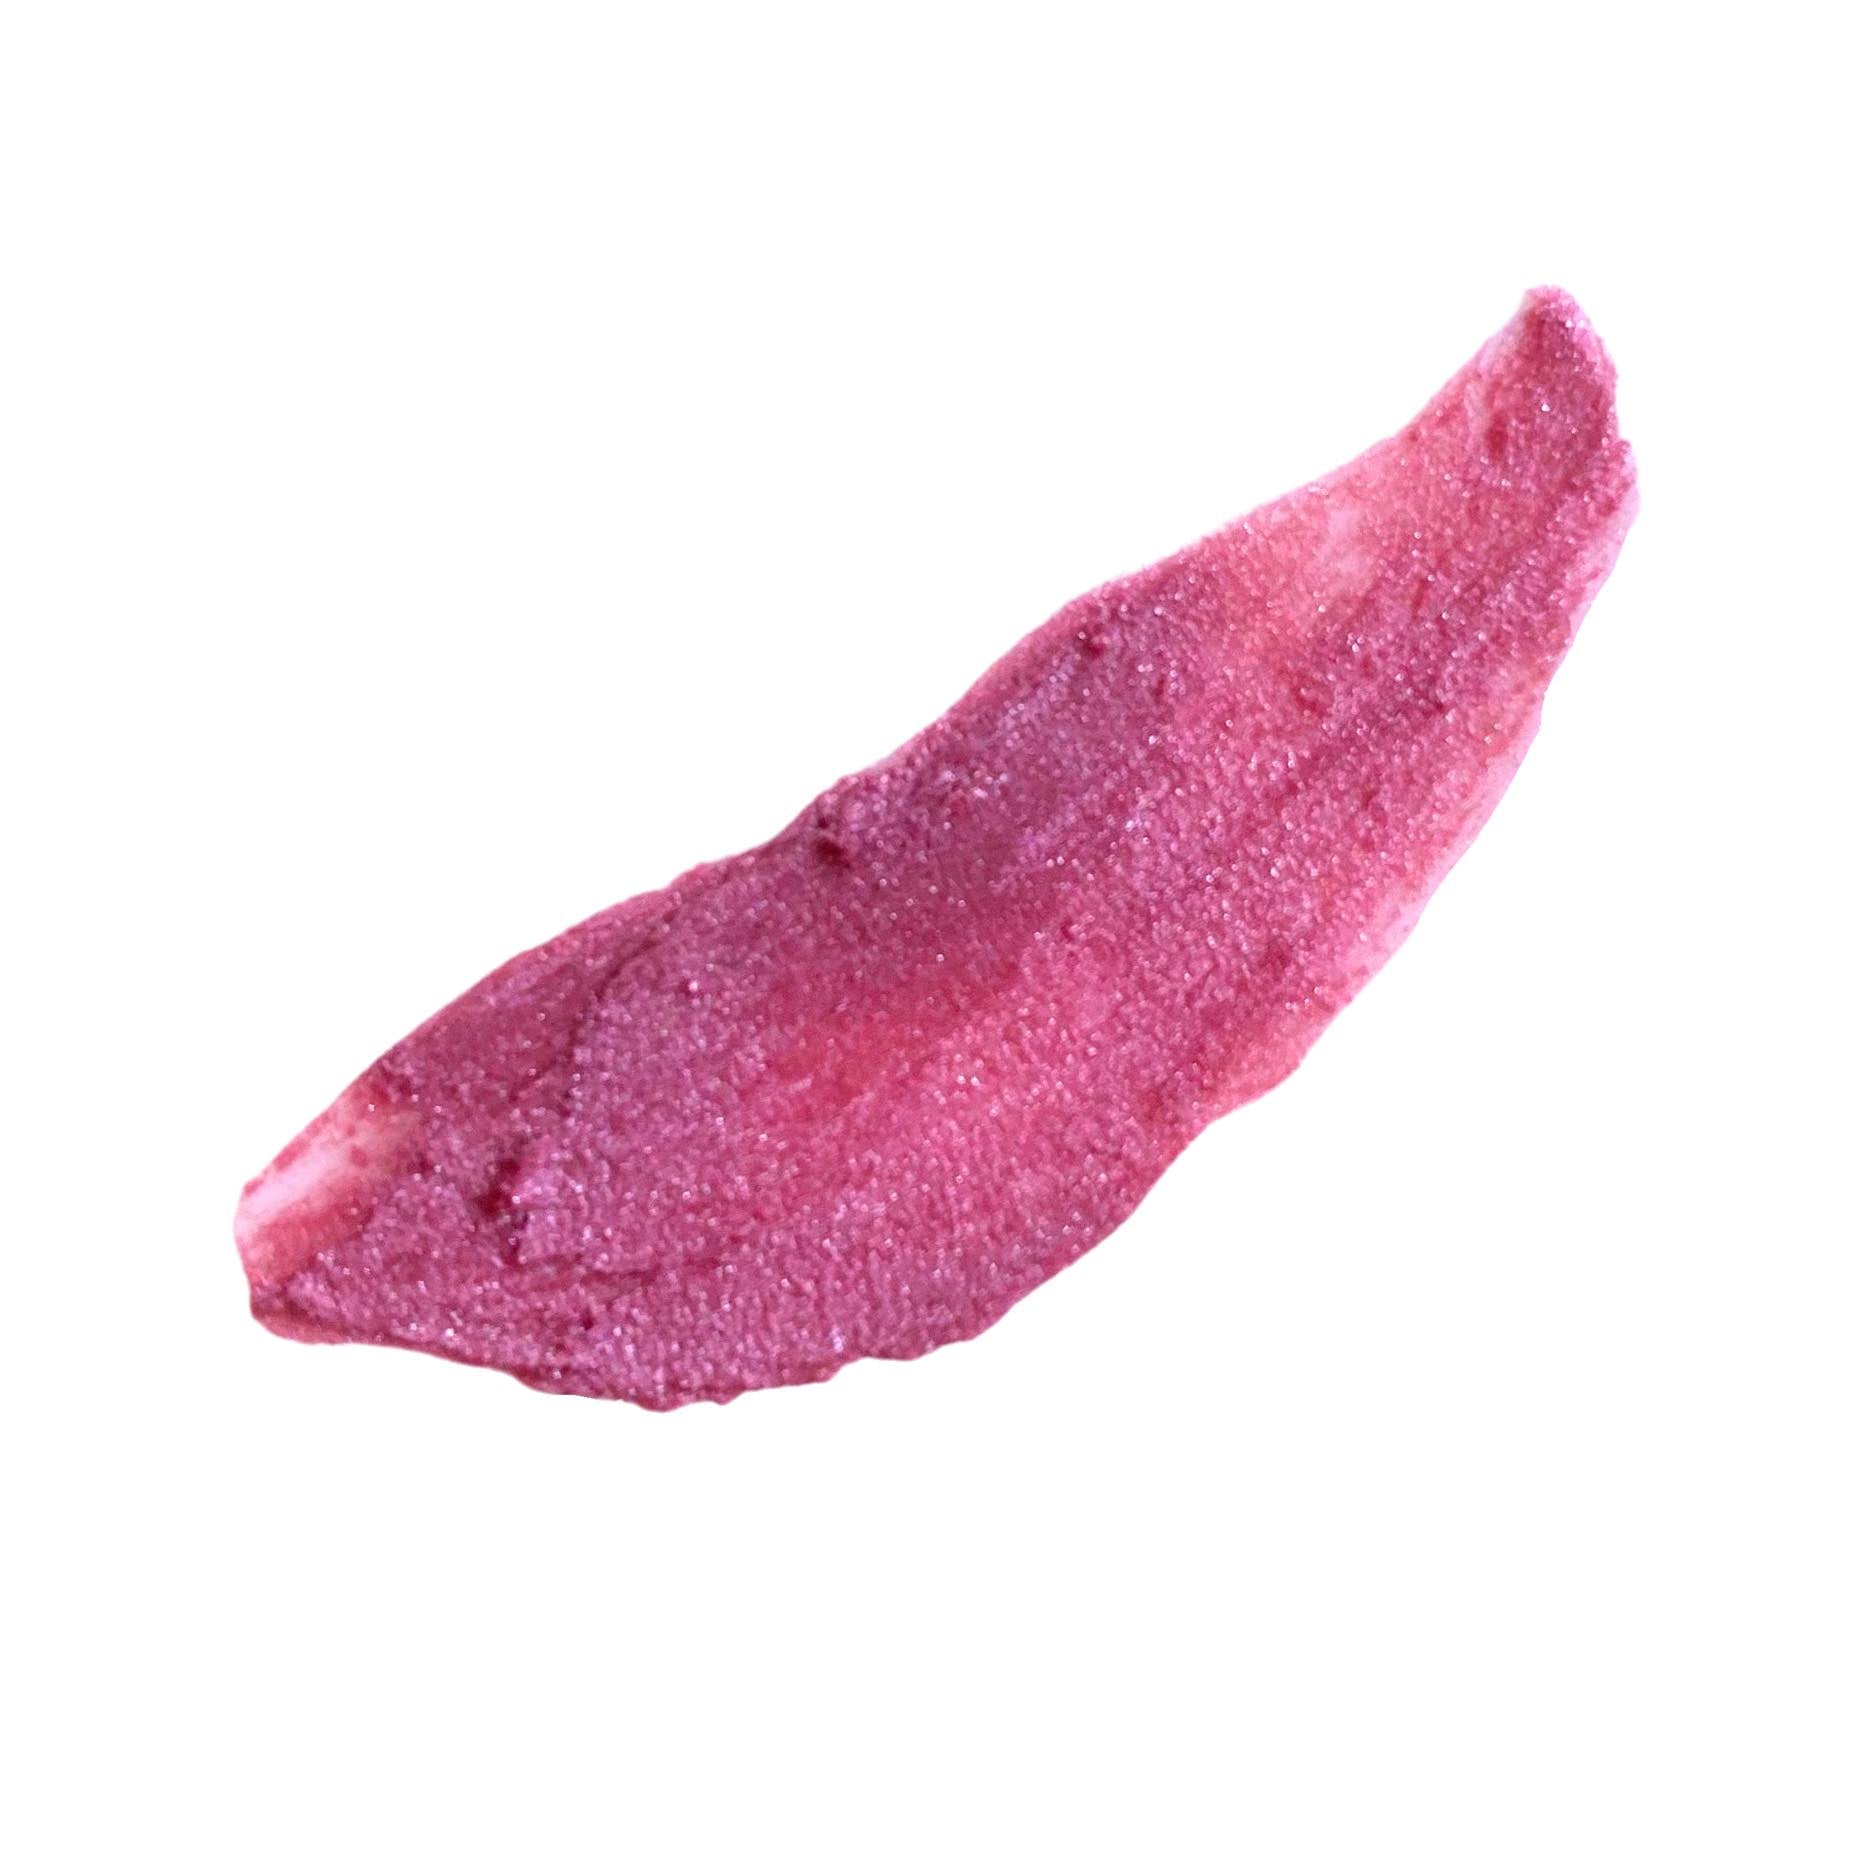 soft lilac tinted lip balm smear on white background